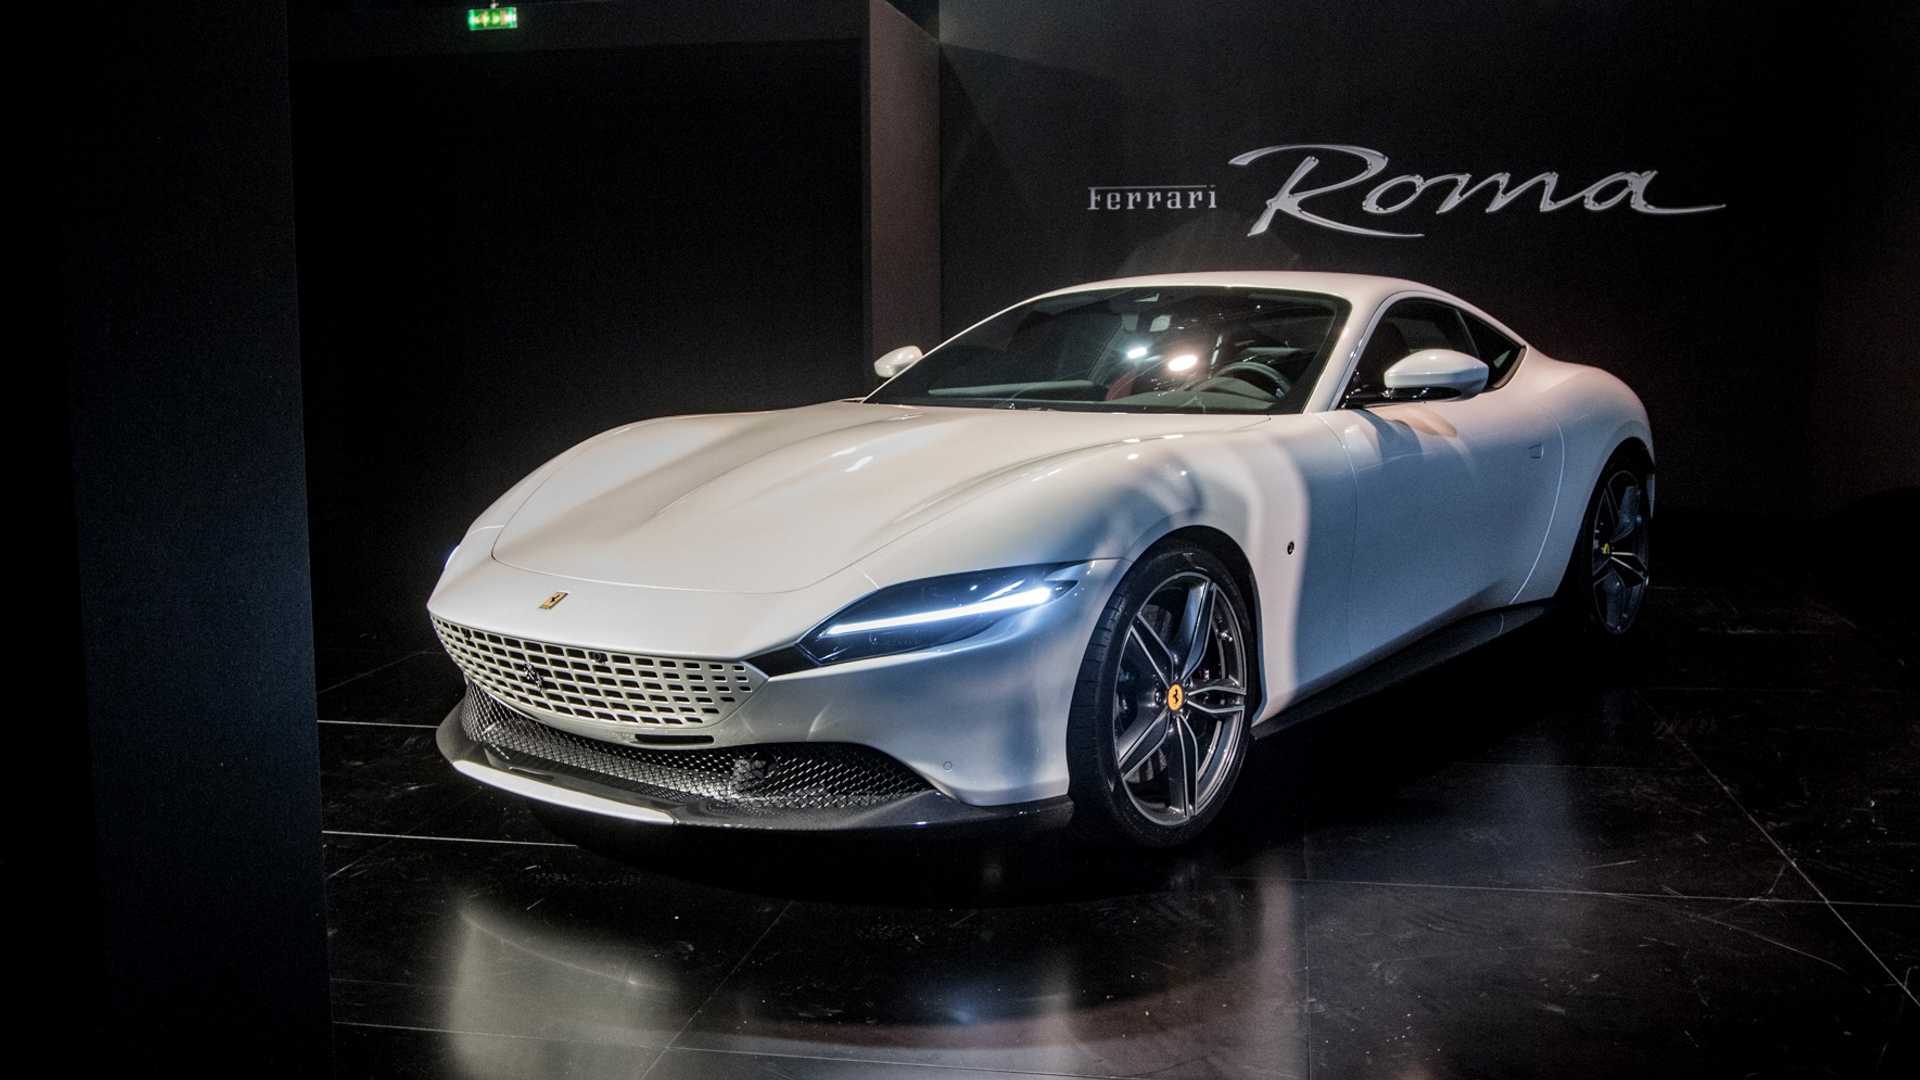 Ferrari Roma Shows Off Its Sleek Styling In Live Photo From Premiere